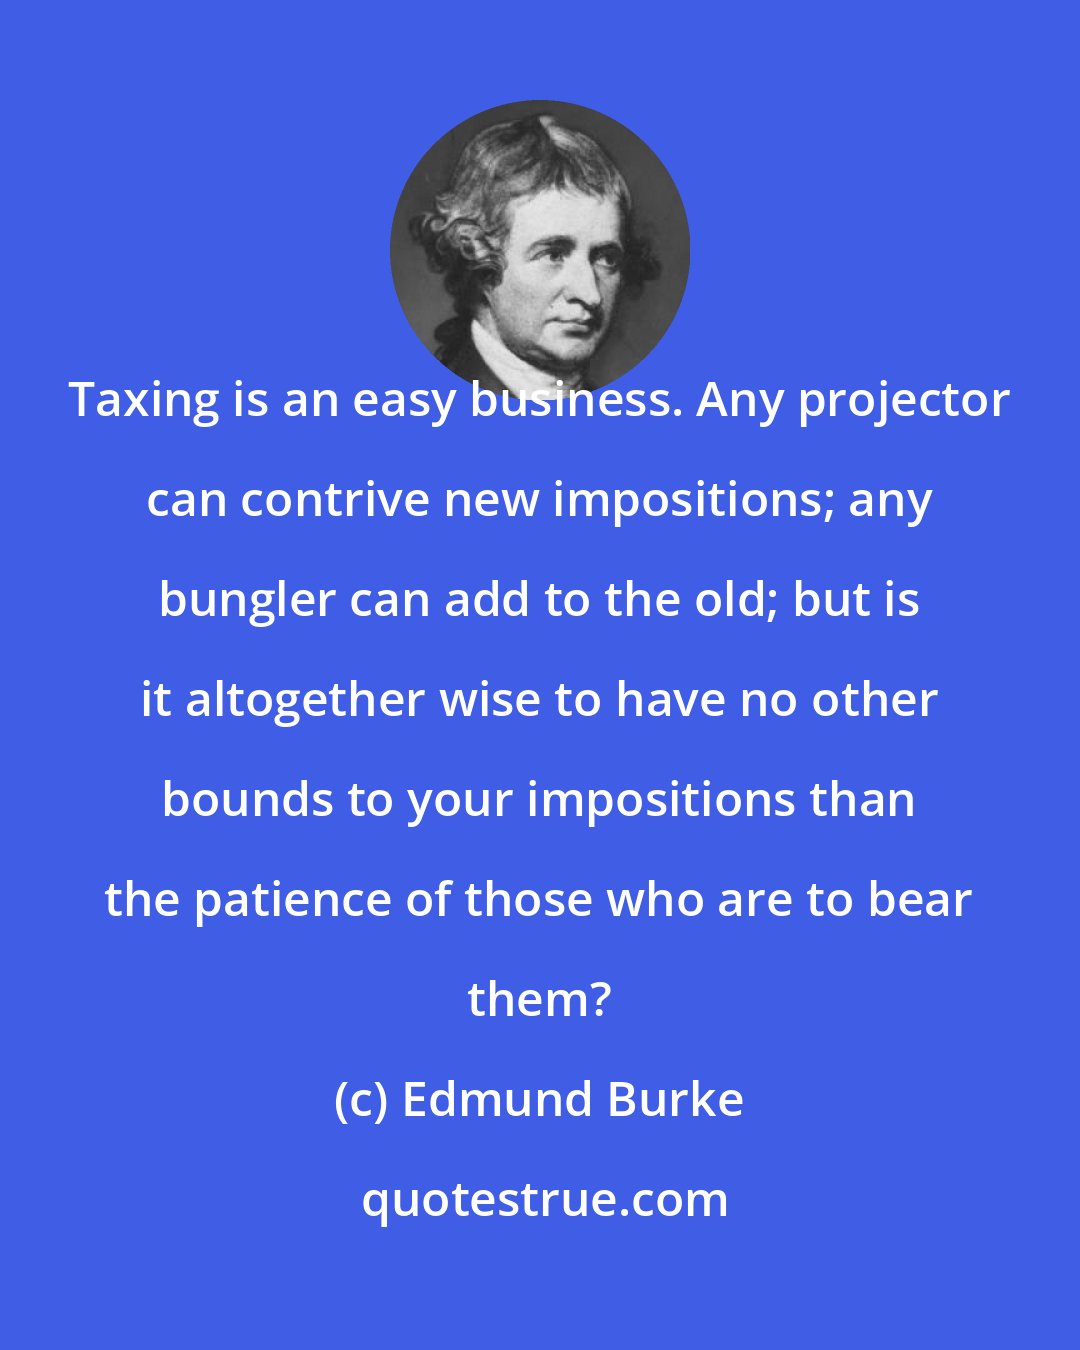 Edmund Burke: Taxing is an easy business. Any projector can contrive new impositions; any bungler can add to the old; but is it altogether wise to have no other bounds to your impositions than the patience of those who are to bear them?